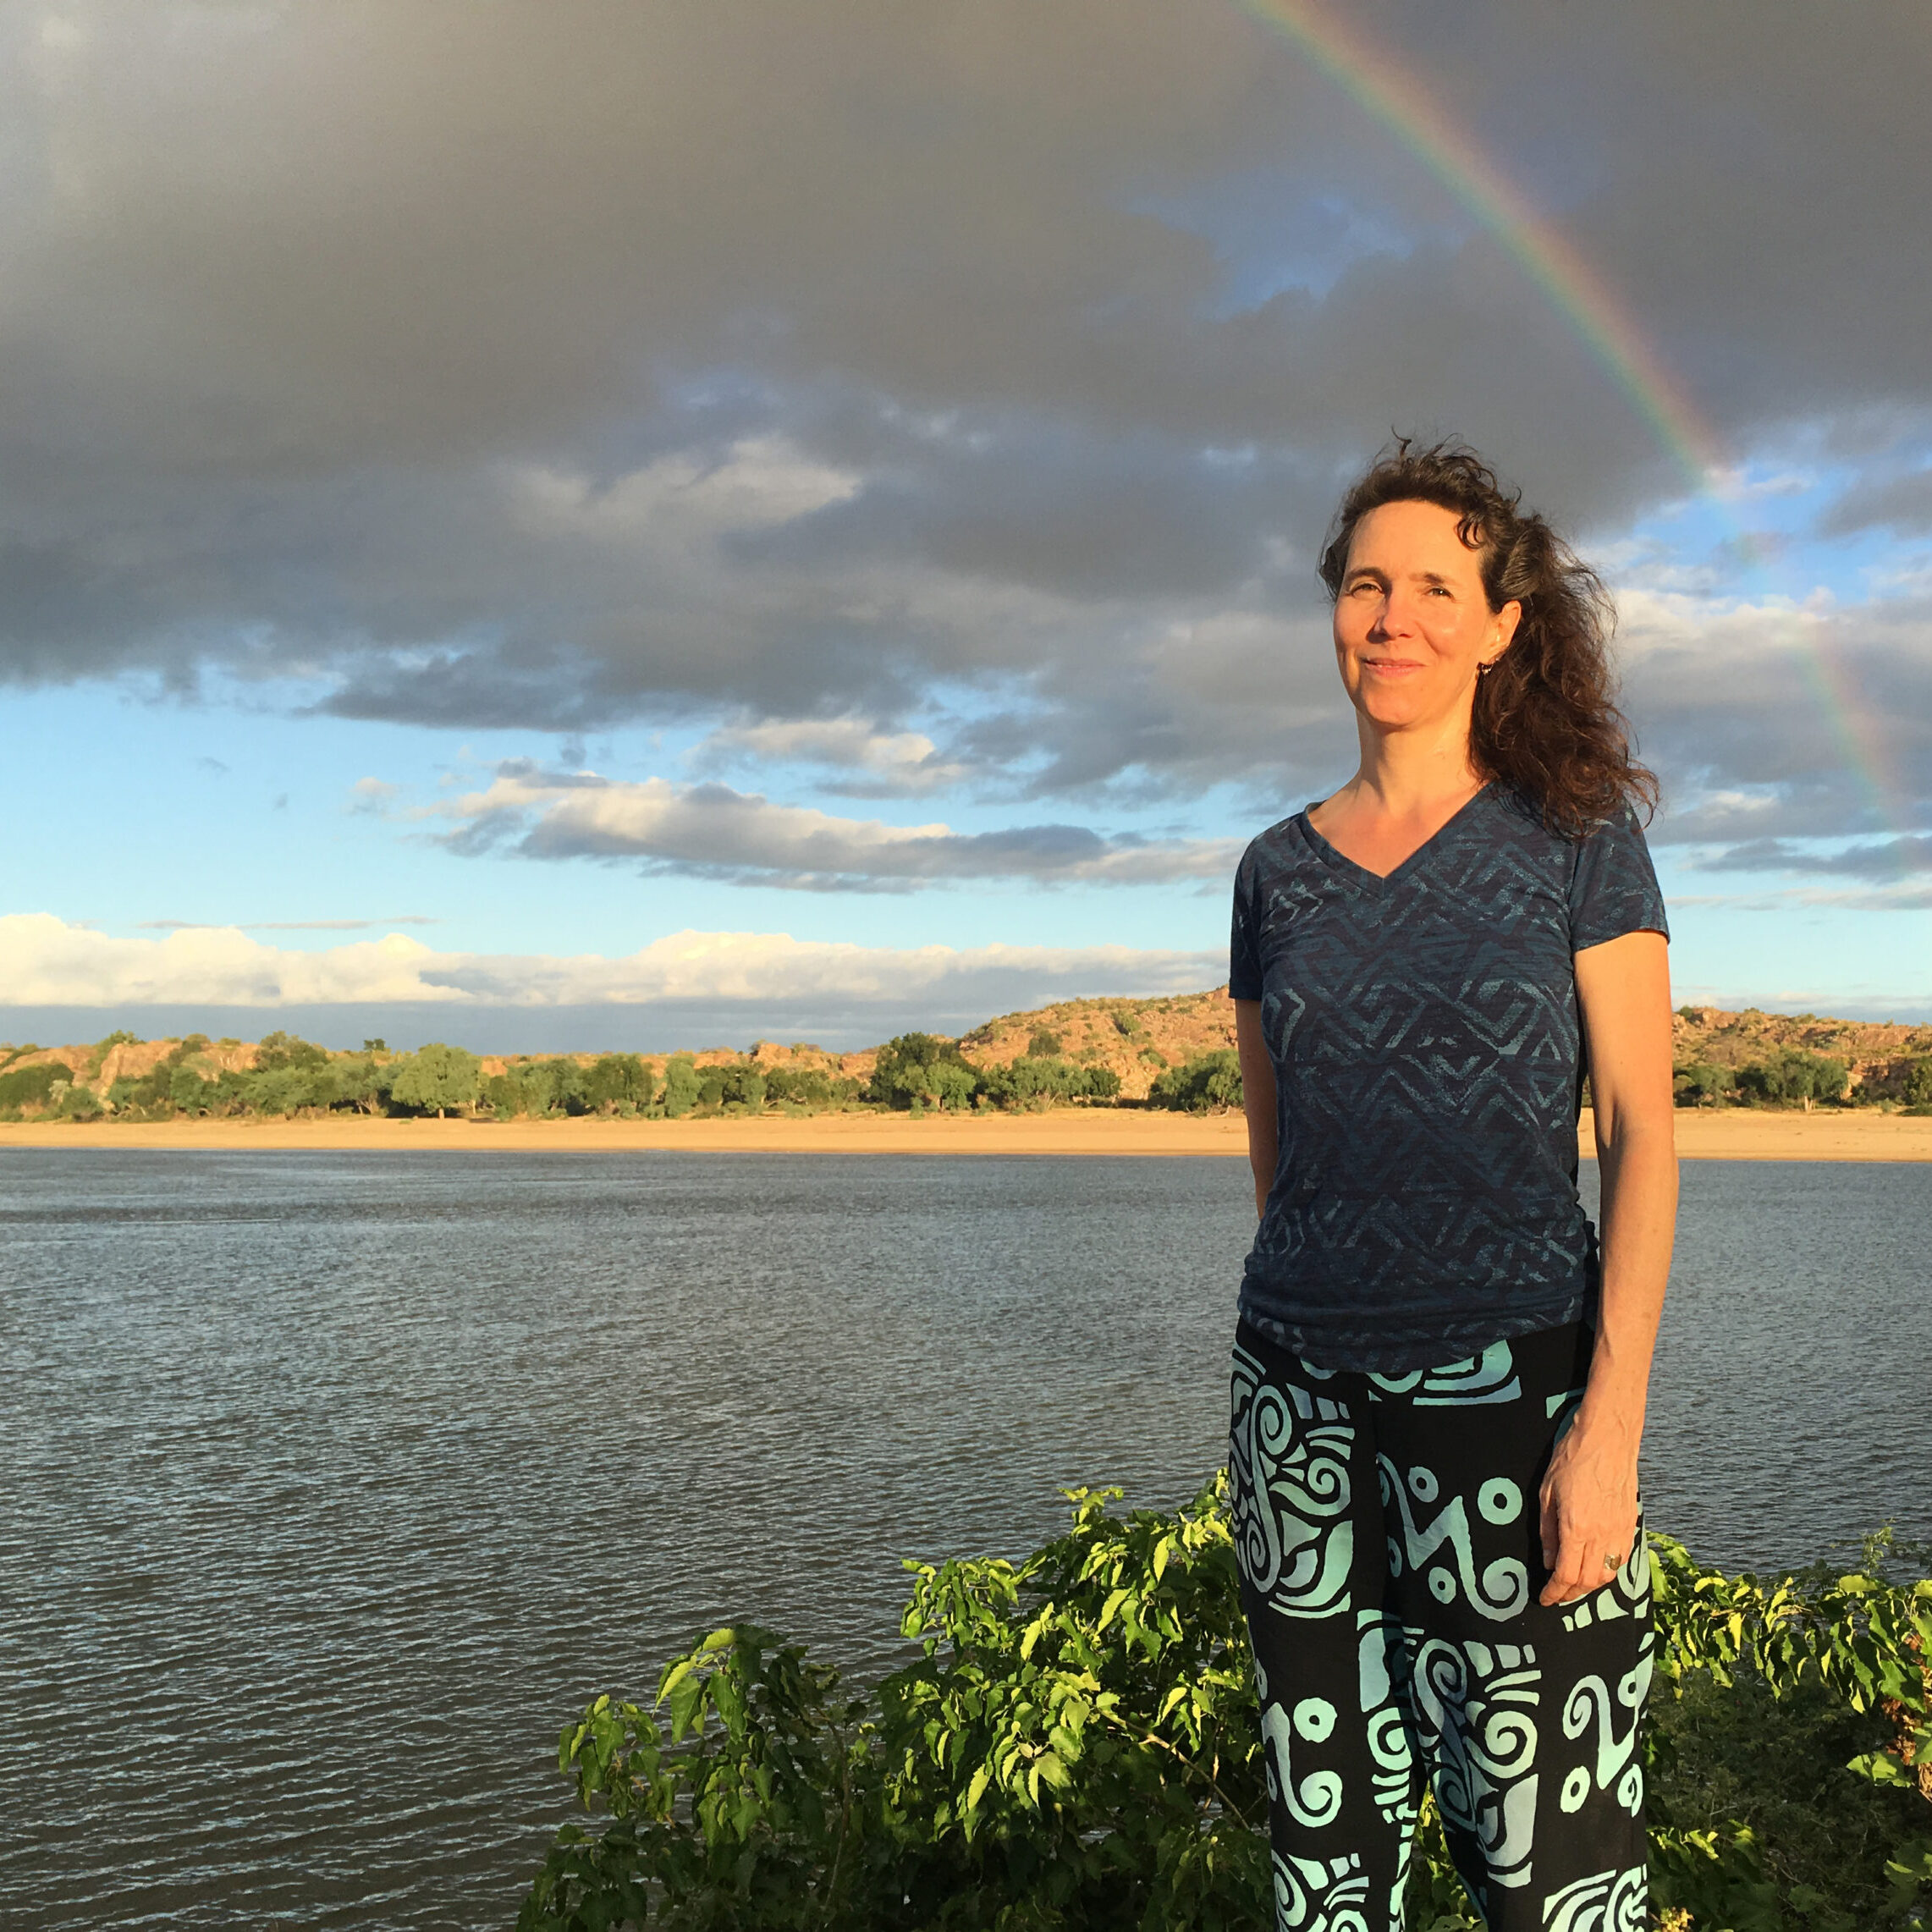 After we found the site of my first village where the massacre occurred we were gifted with a rainbow. It felt like a sign that I had come full circle after 40 years.